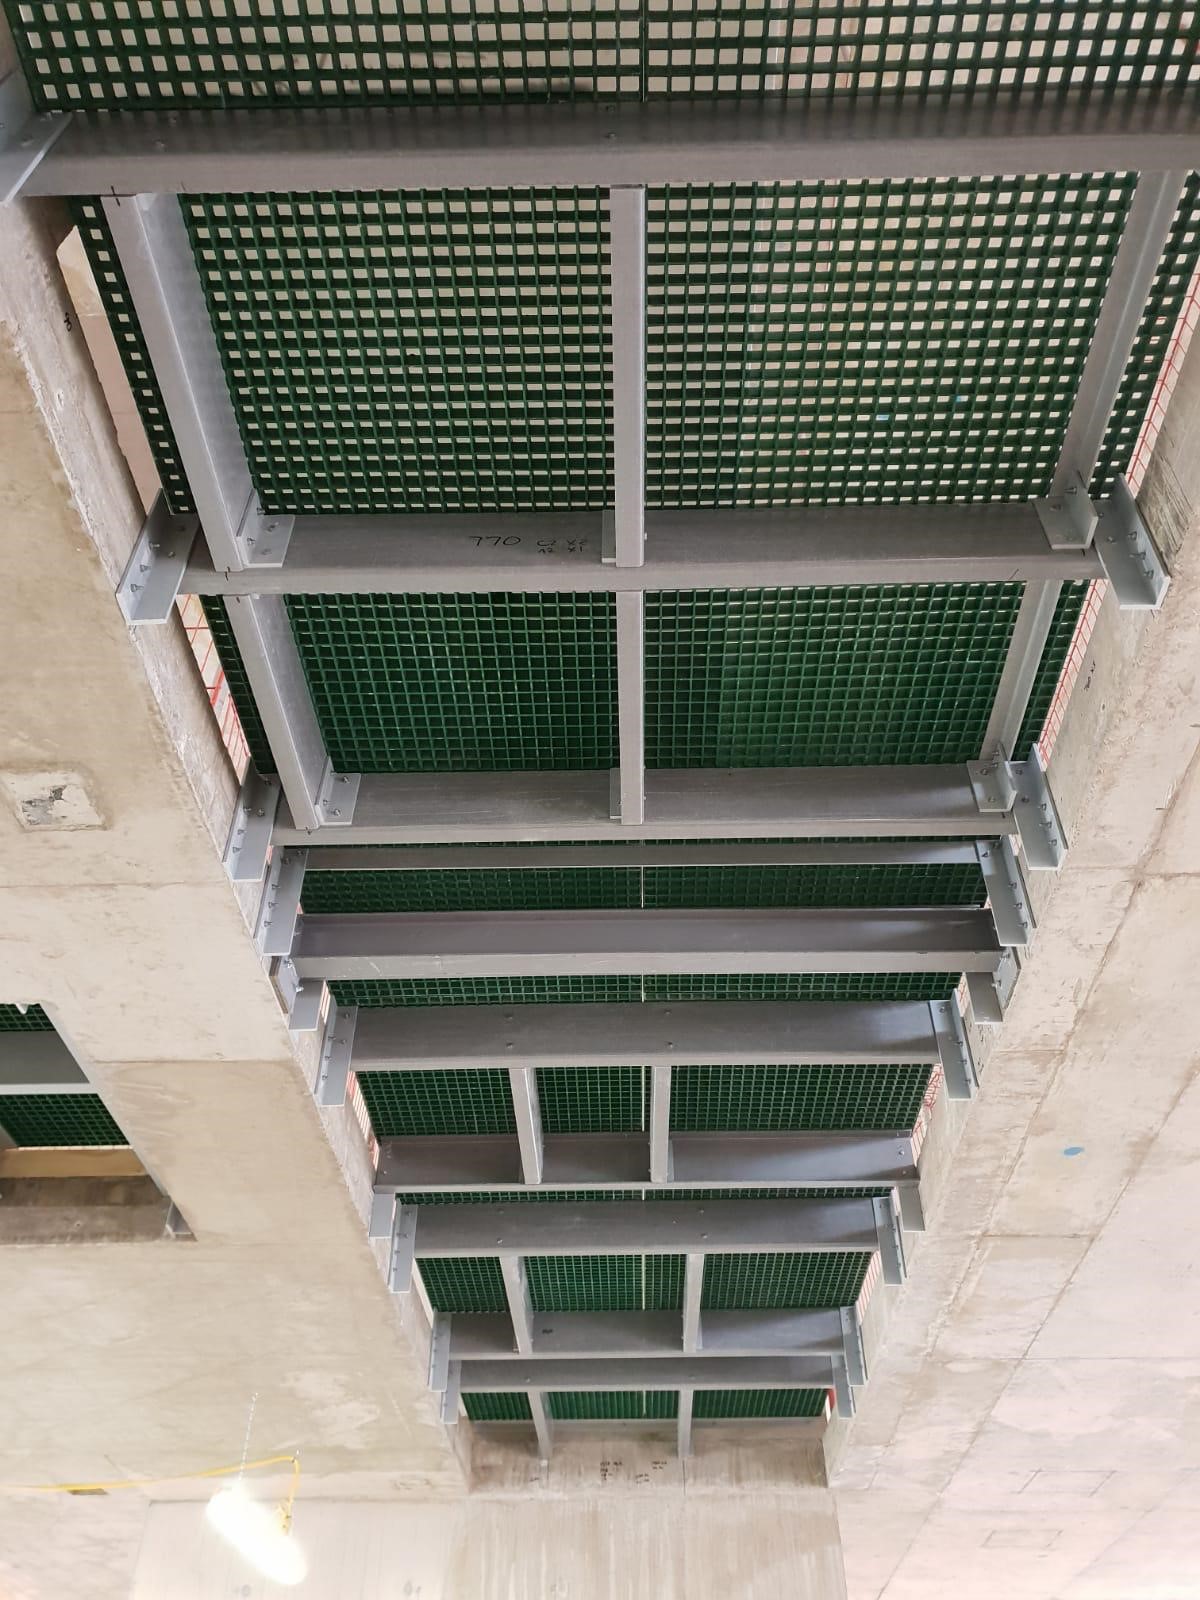 Green GRP grating RiserDeck Service riser set into the floor of a high-rise building . Photographed from the floor below to show the GRP profiles used to support the riser floor.